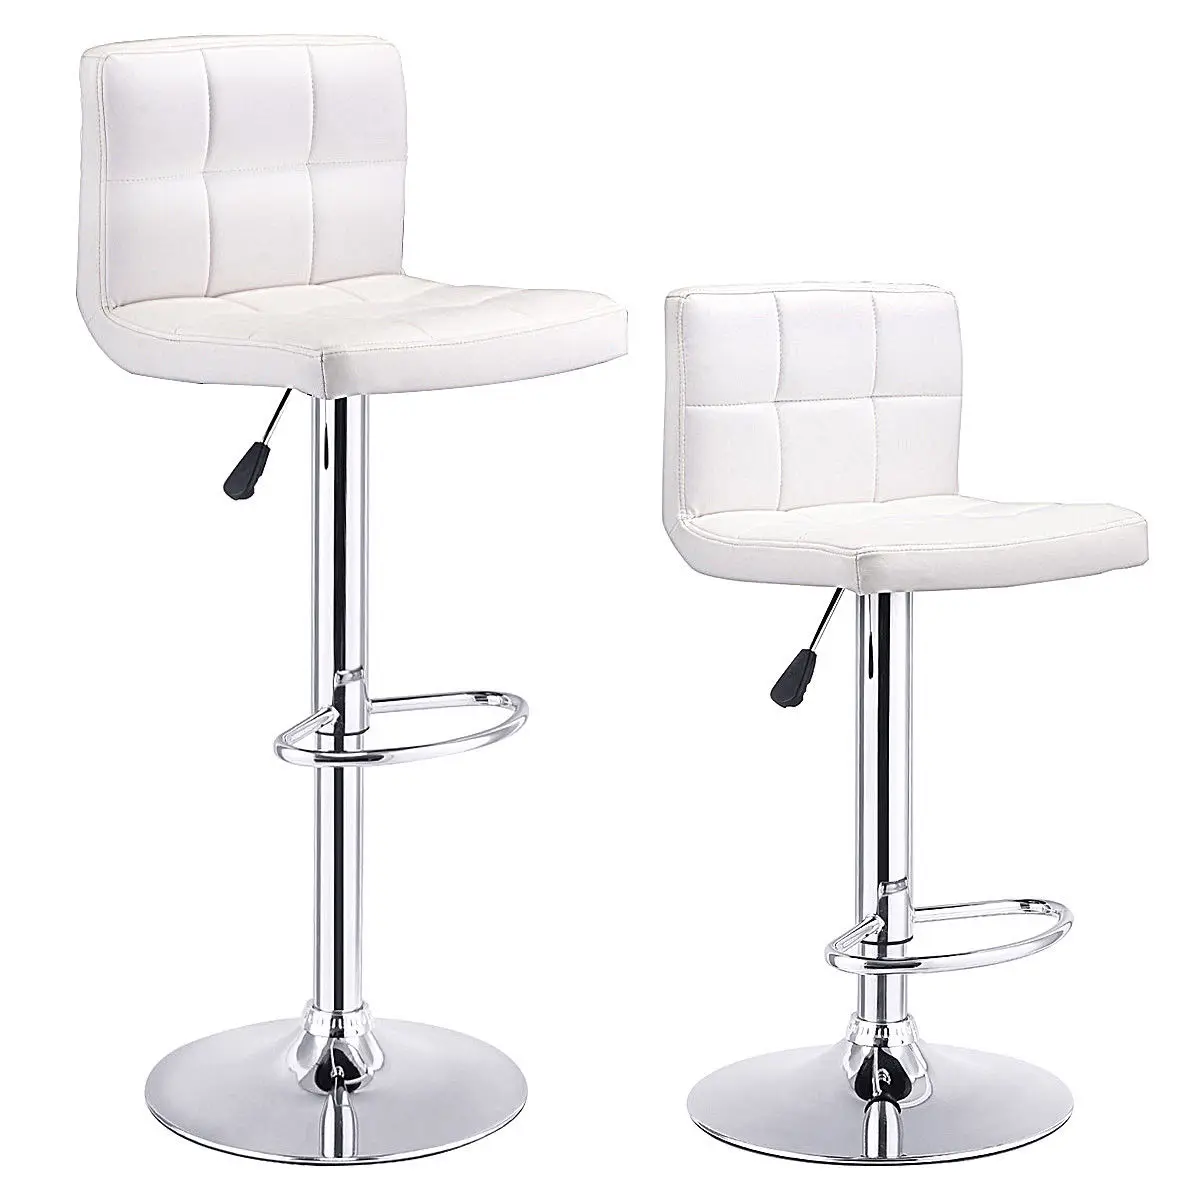 

Costway Set Of 2 Bar Stools PU Leather Adjustable Barstool Swivel Pub Chairs White HW53840WH